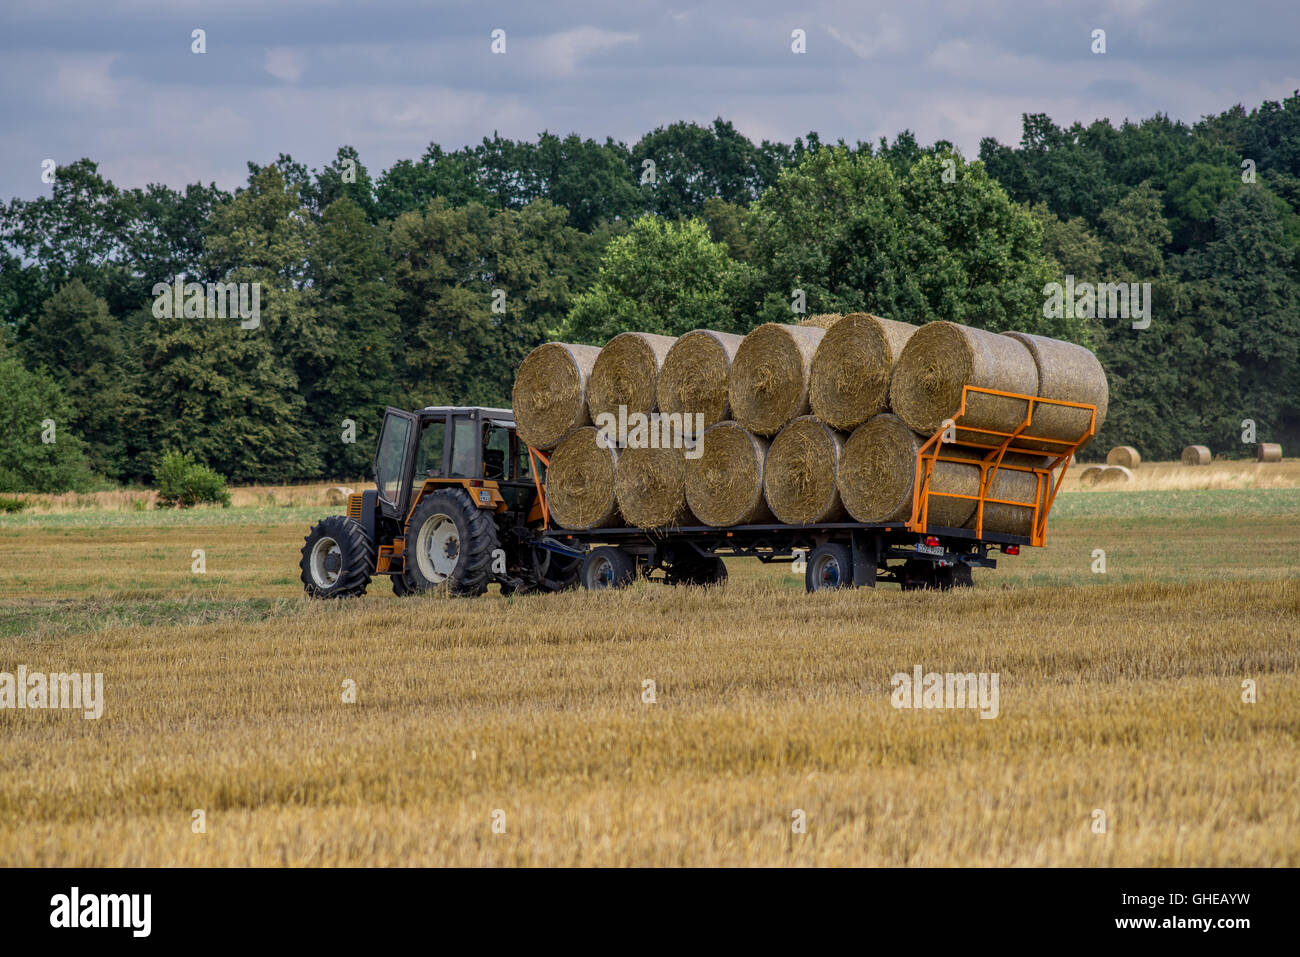 Tractor with a trailer full of straw bales Lower Silesia Poland Stock Photo